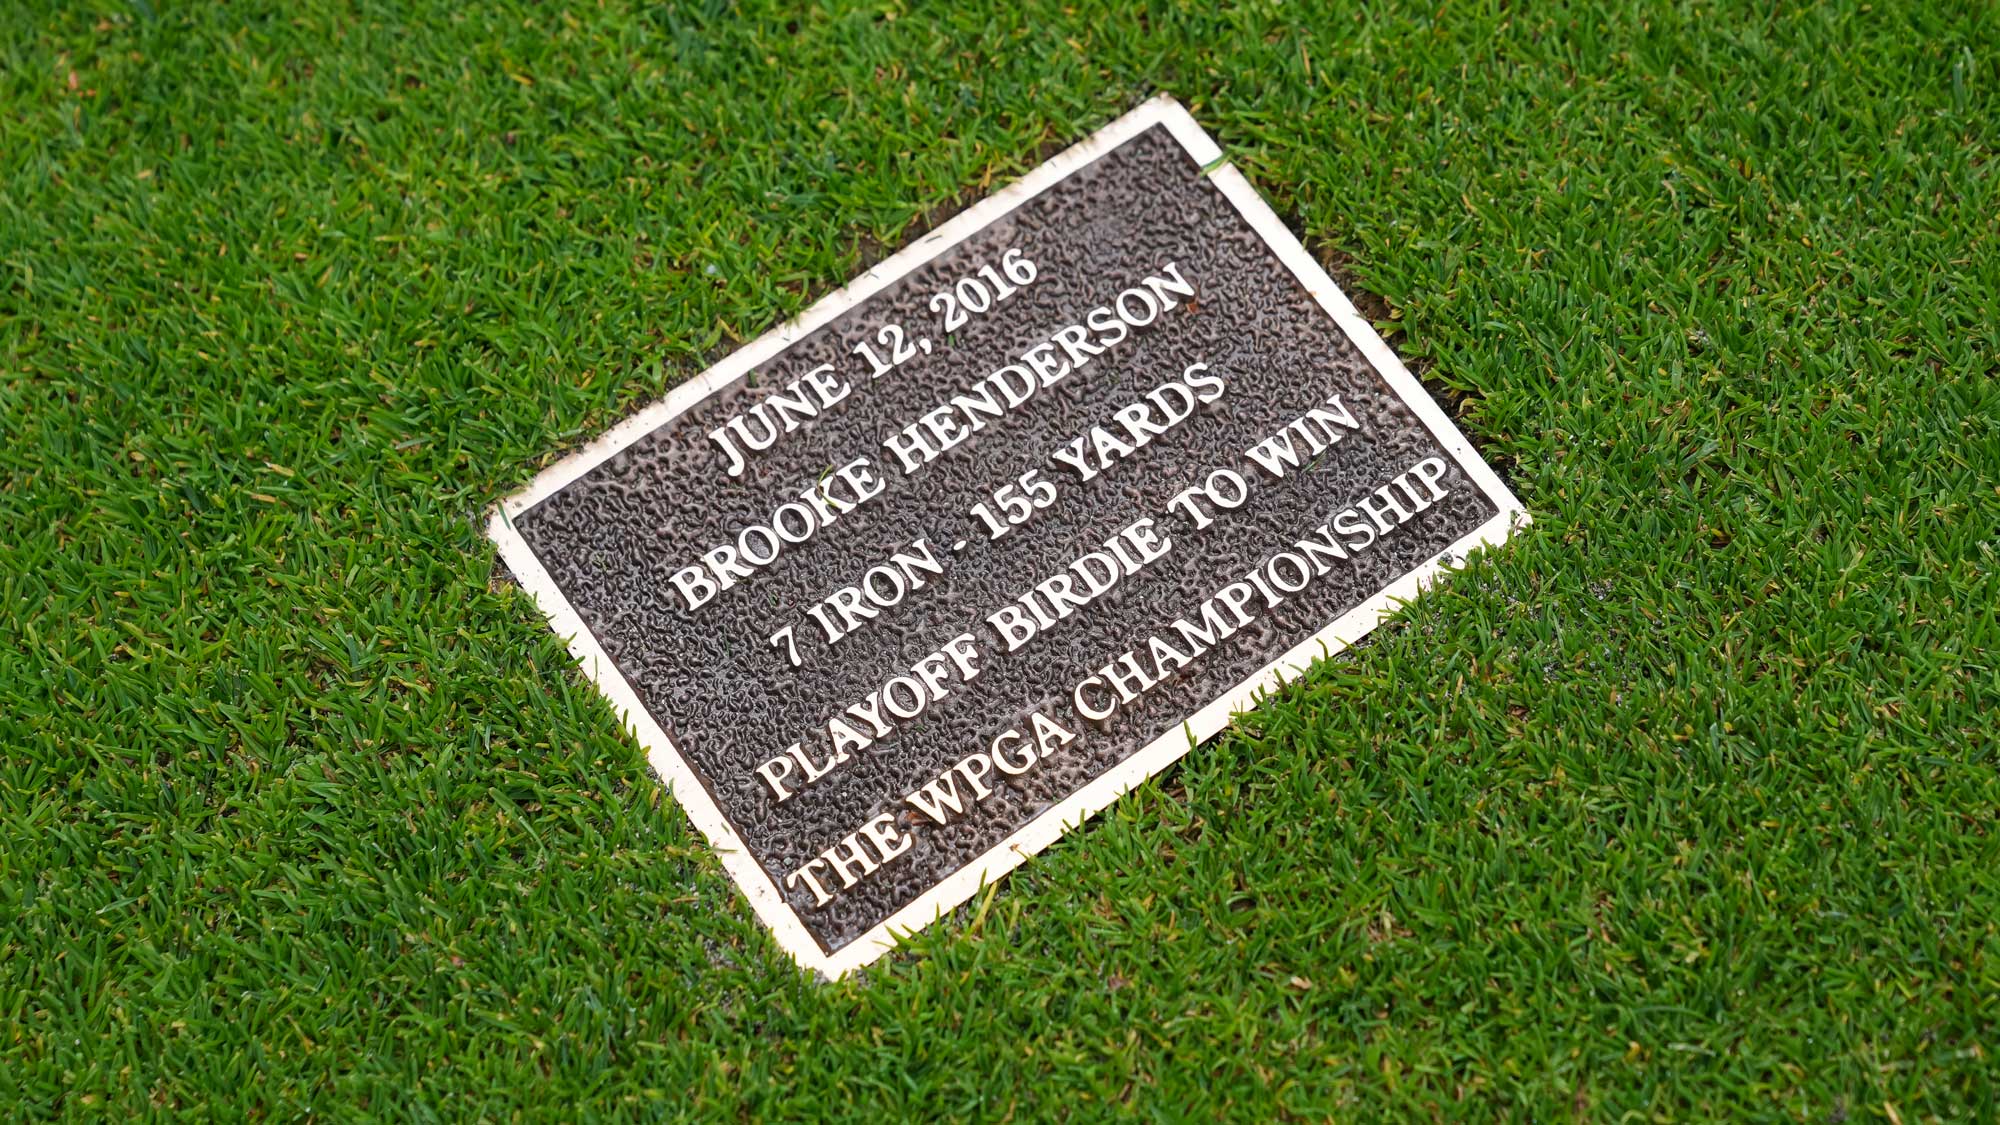 Brooke Henderson's plaque on the 18th hole fairway during the KPMG Women's PGA Championship at Sahalee Country Club on Tuesday, June 18, 2024 in Sammamish, Washington.